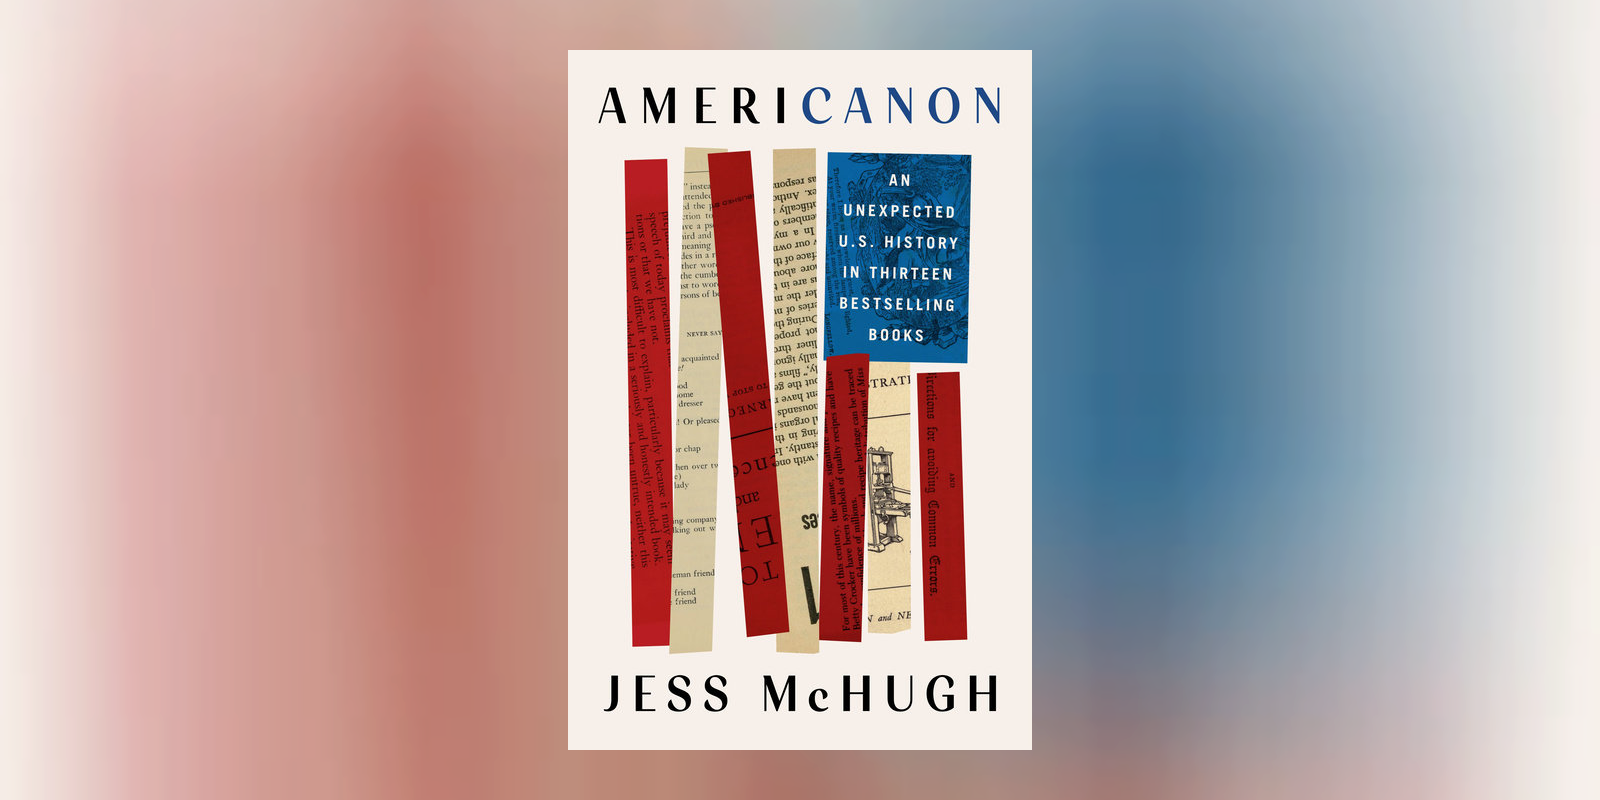 <i>Americanon</i> Author Jess McHugh asks “Who gets to tell the American Story?”